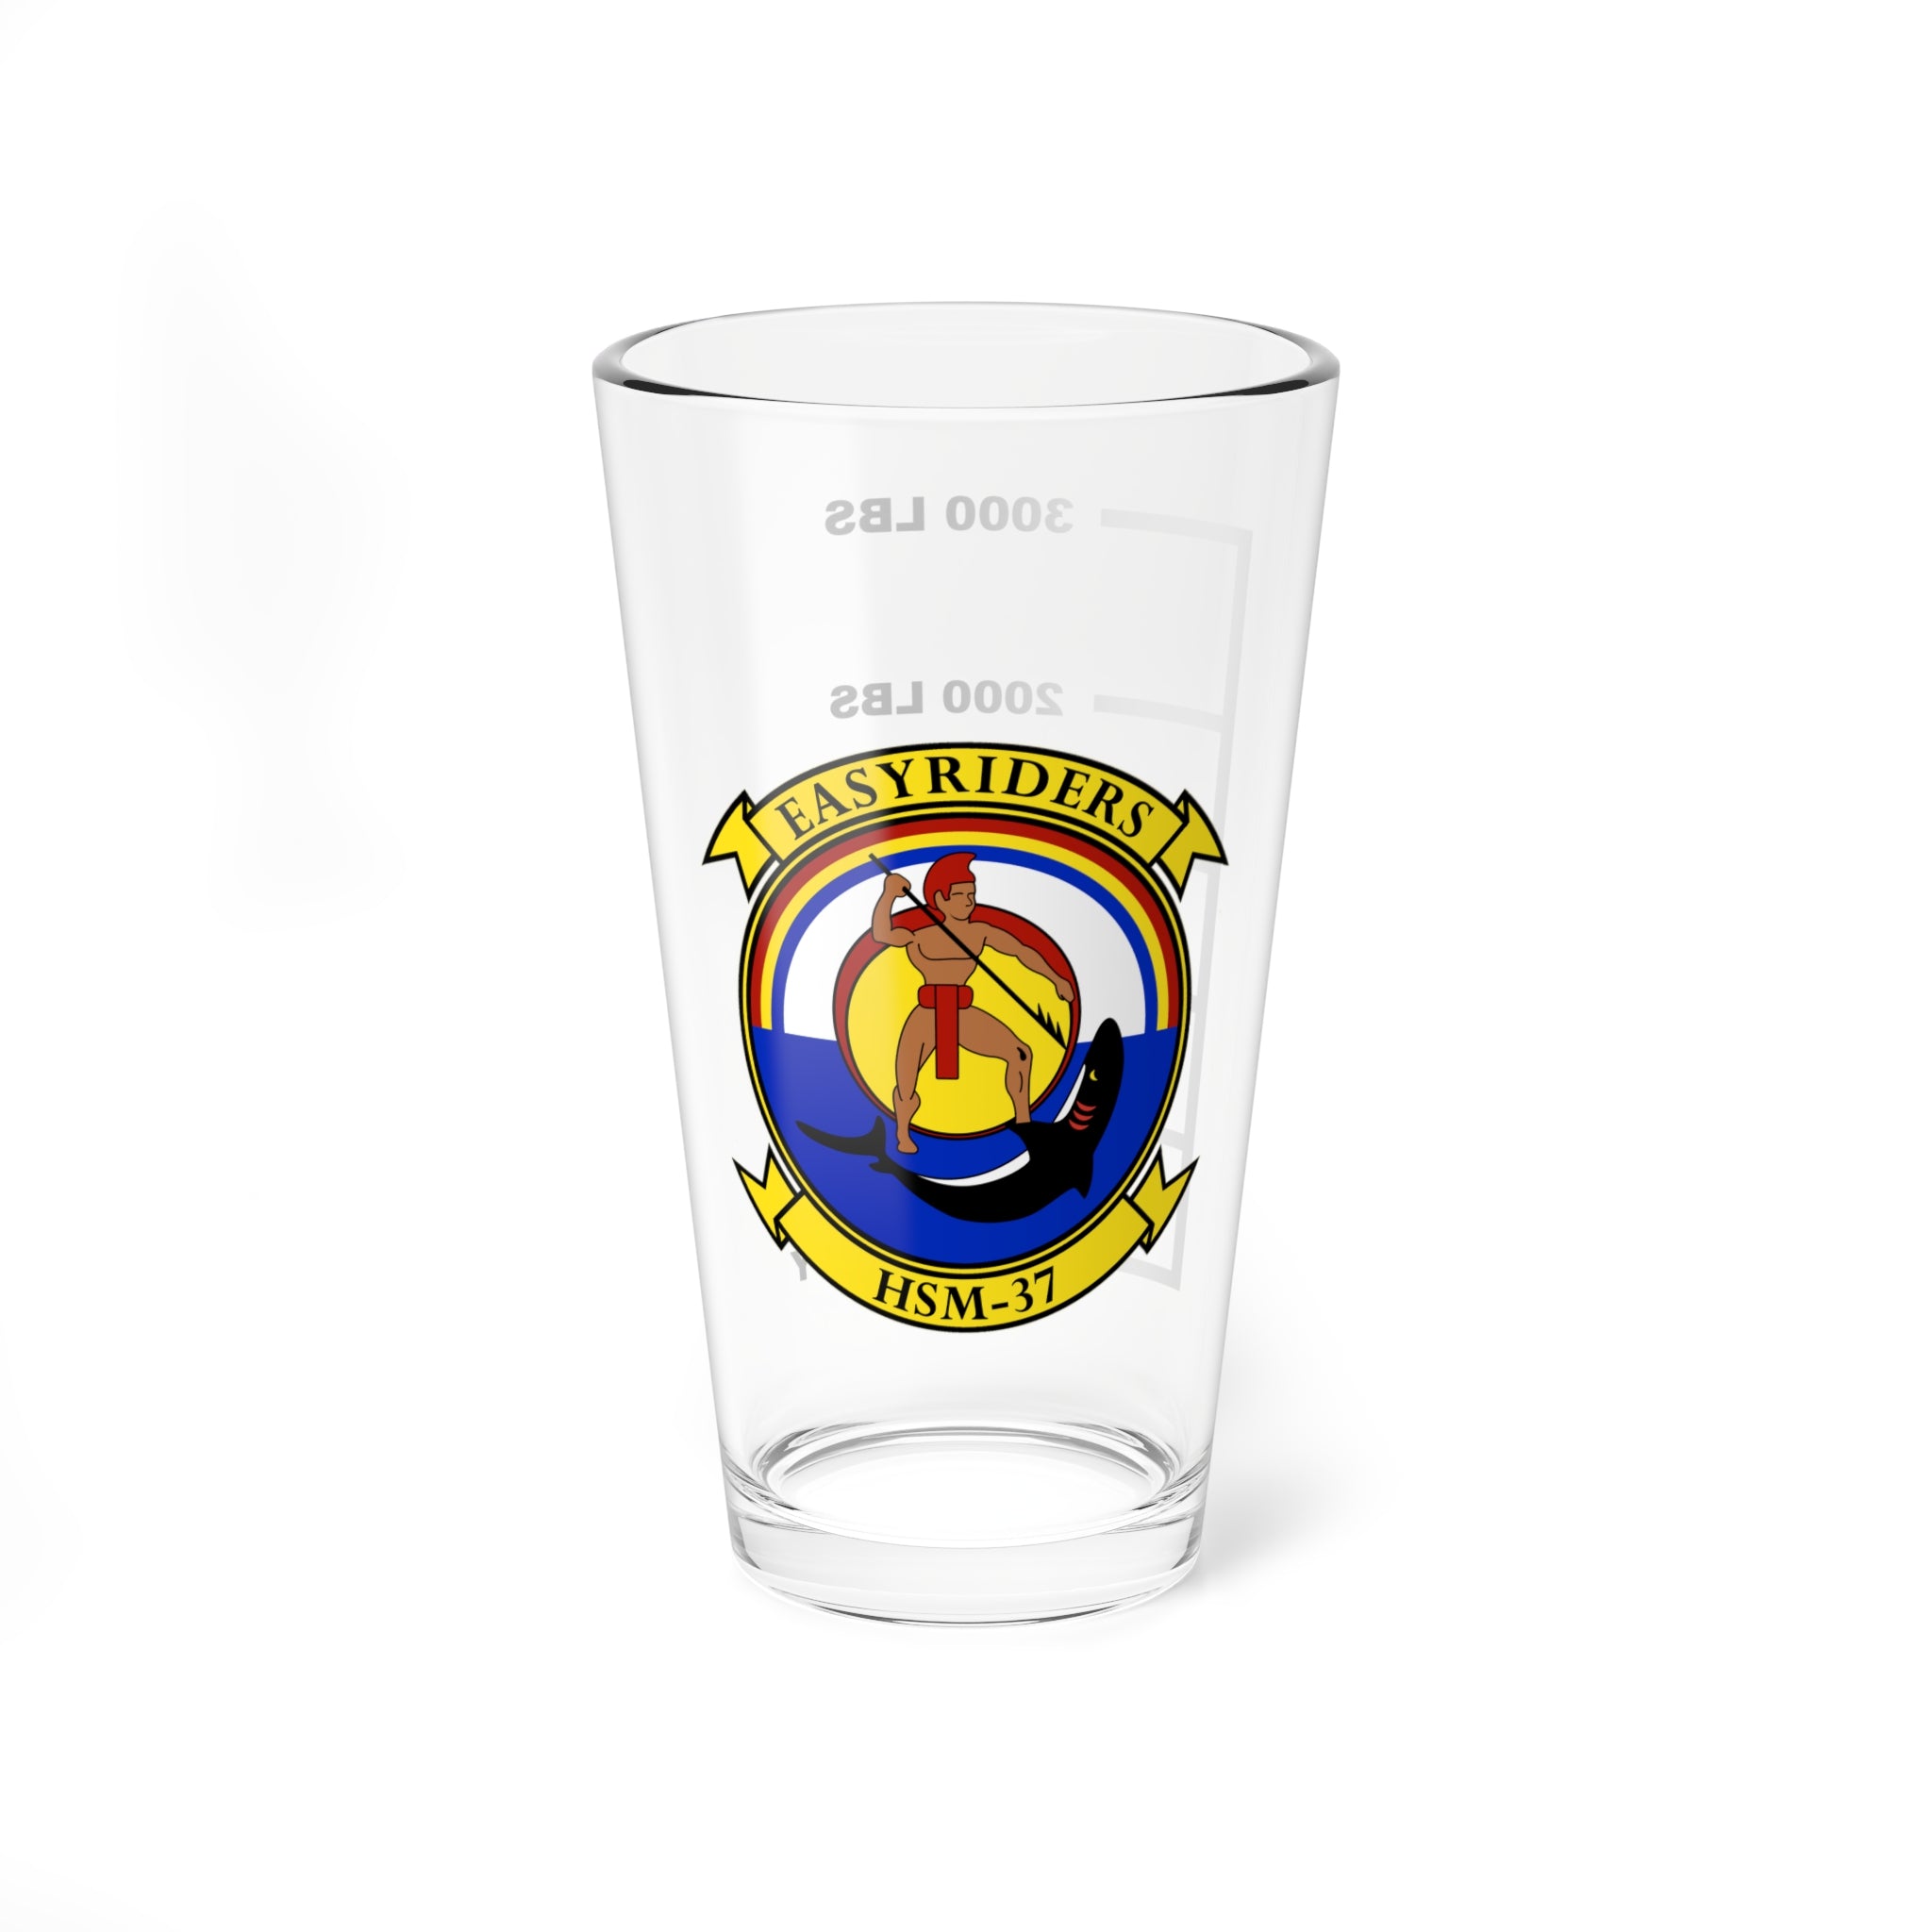 HSM-37 "Easy Riders" Fuel Low Pint Glass , 16oz, Navy Helicopter Maritime Strike Squadron flying the MH-60R